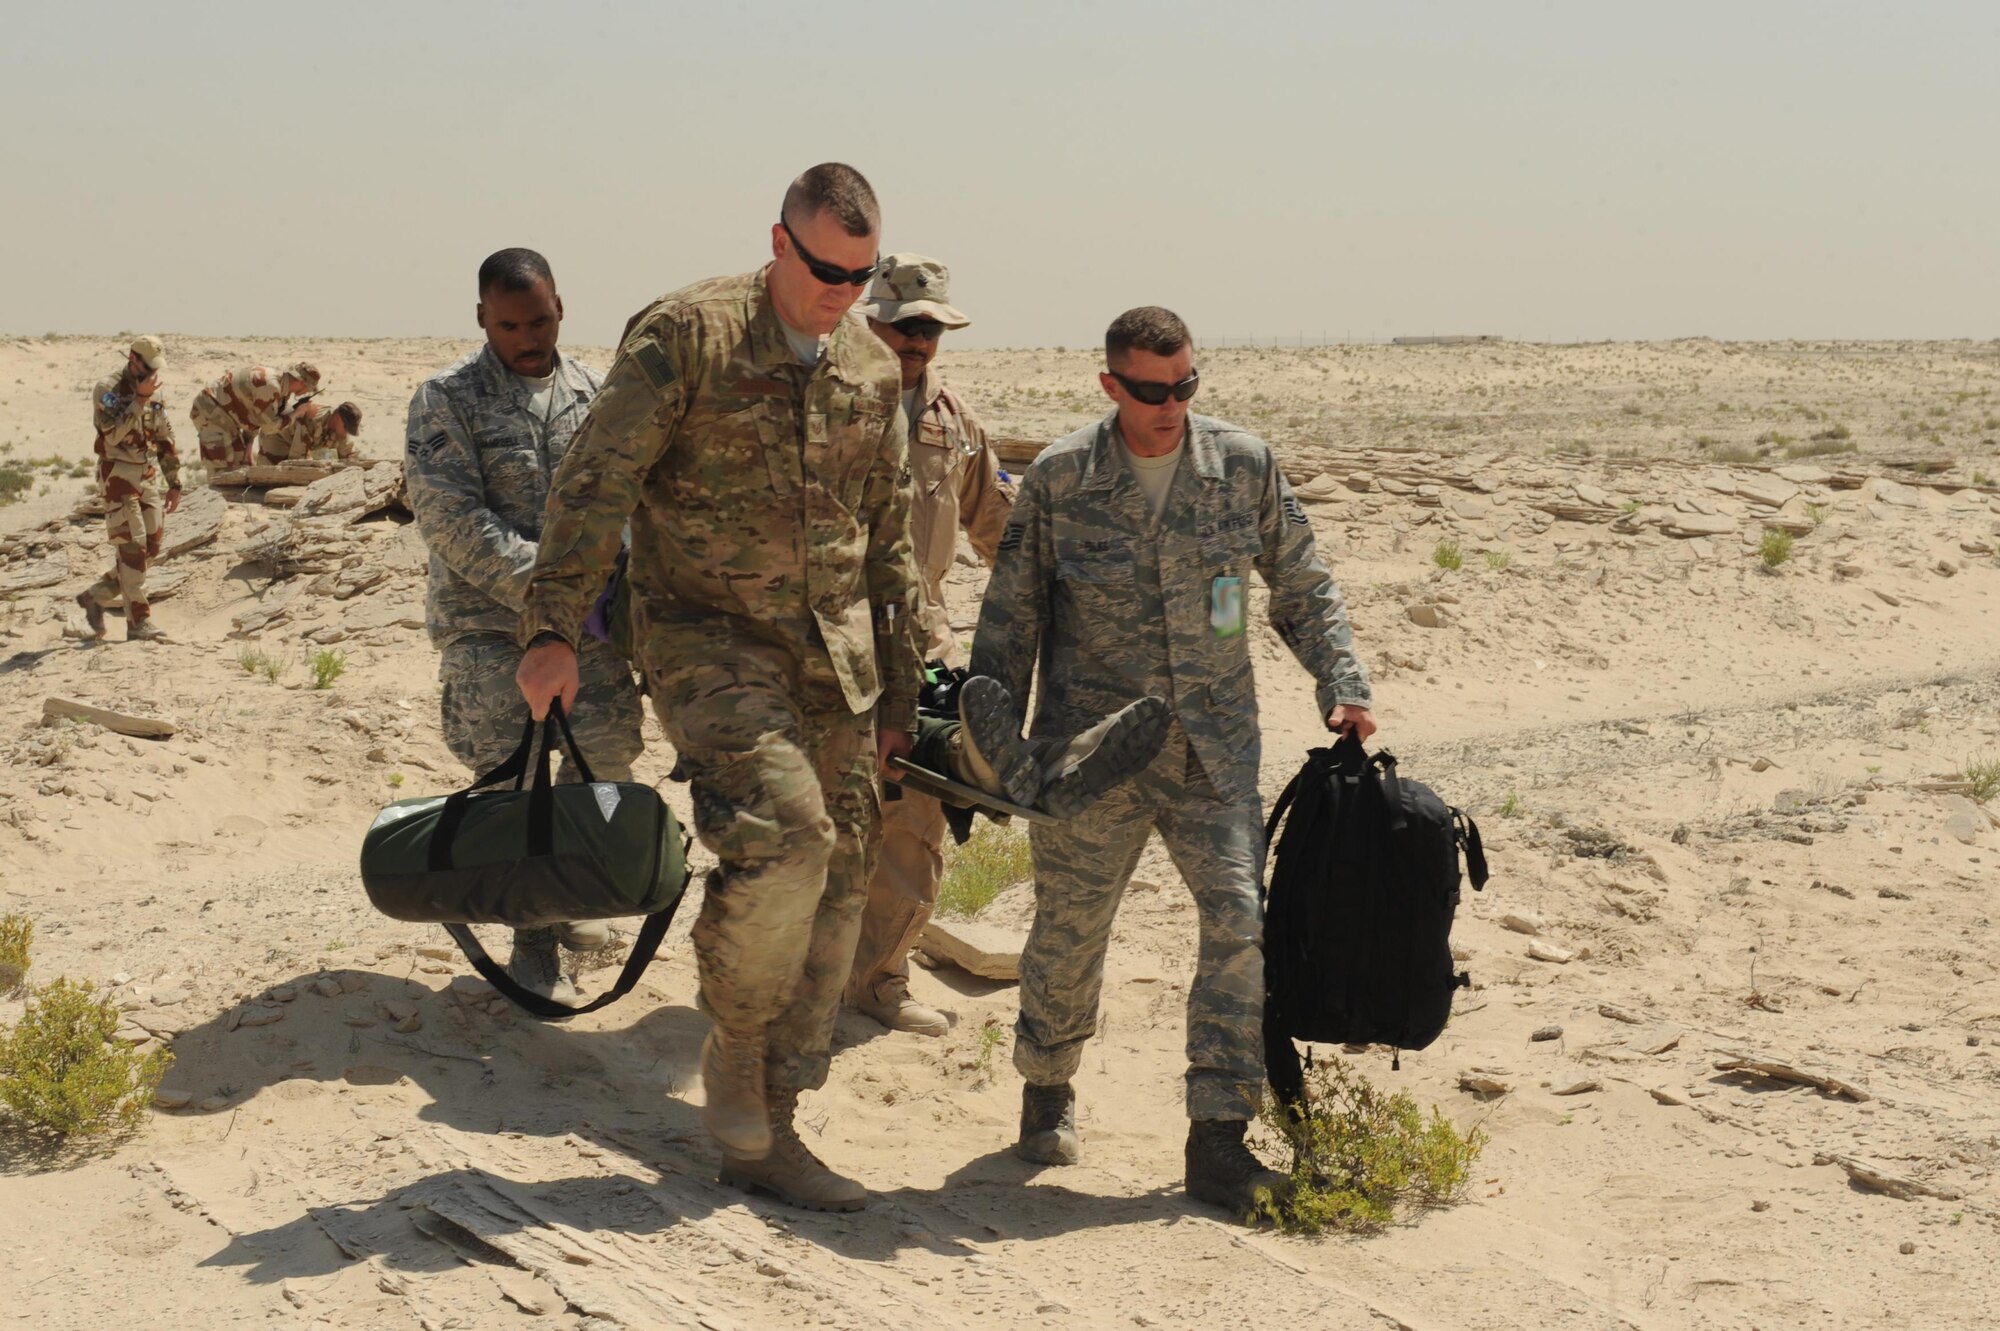 Members of the 380th Expeditionary Medical Group medical operations flight transport a patient from the scene of a crash exercise at an undisclosed location in Southwest Asia, May 16, 2017. Coalition members worked together to respond to two separate exercise sites to test how they would respond in the event of an aircraft mishap. [Faces of French personnel have been obscured at the request of l'Armée de l'air.] (U.S. Air Force photo by Staff Sgt. Marjorie A. Bowlden)